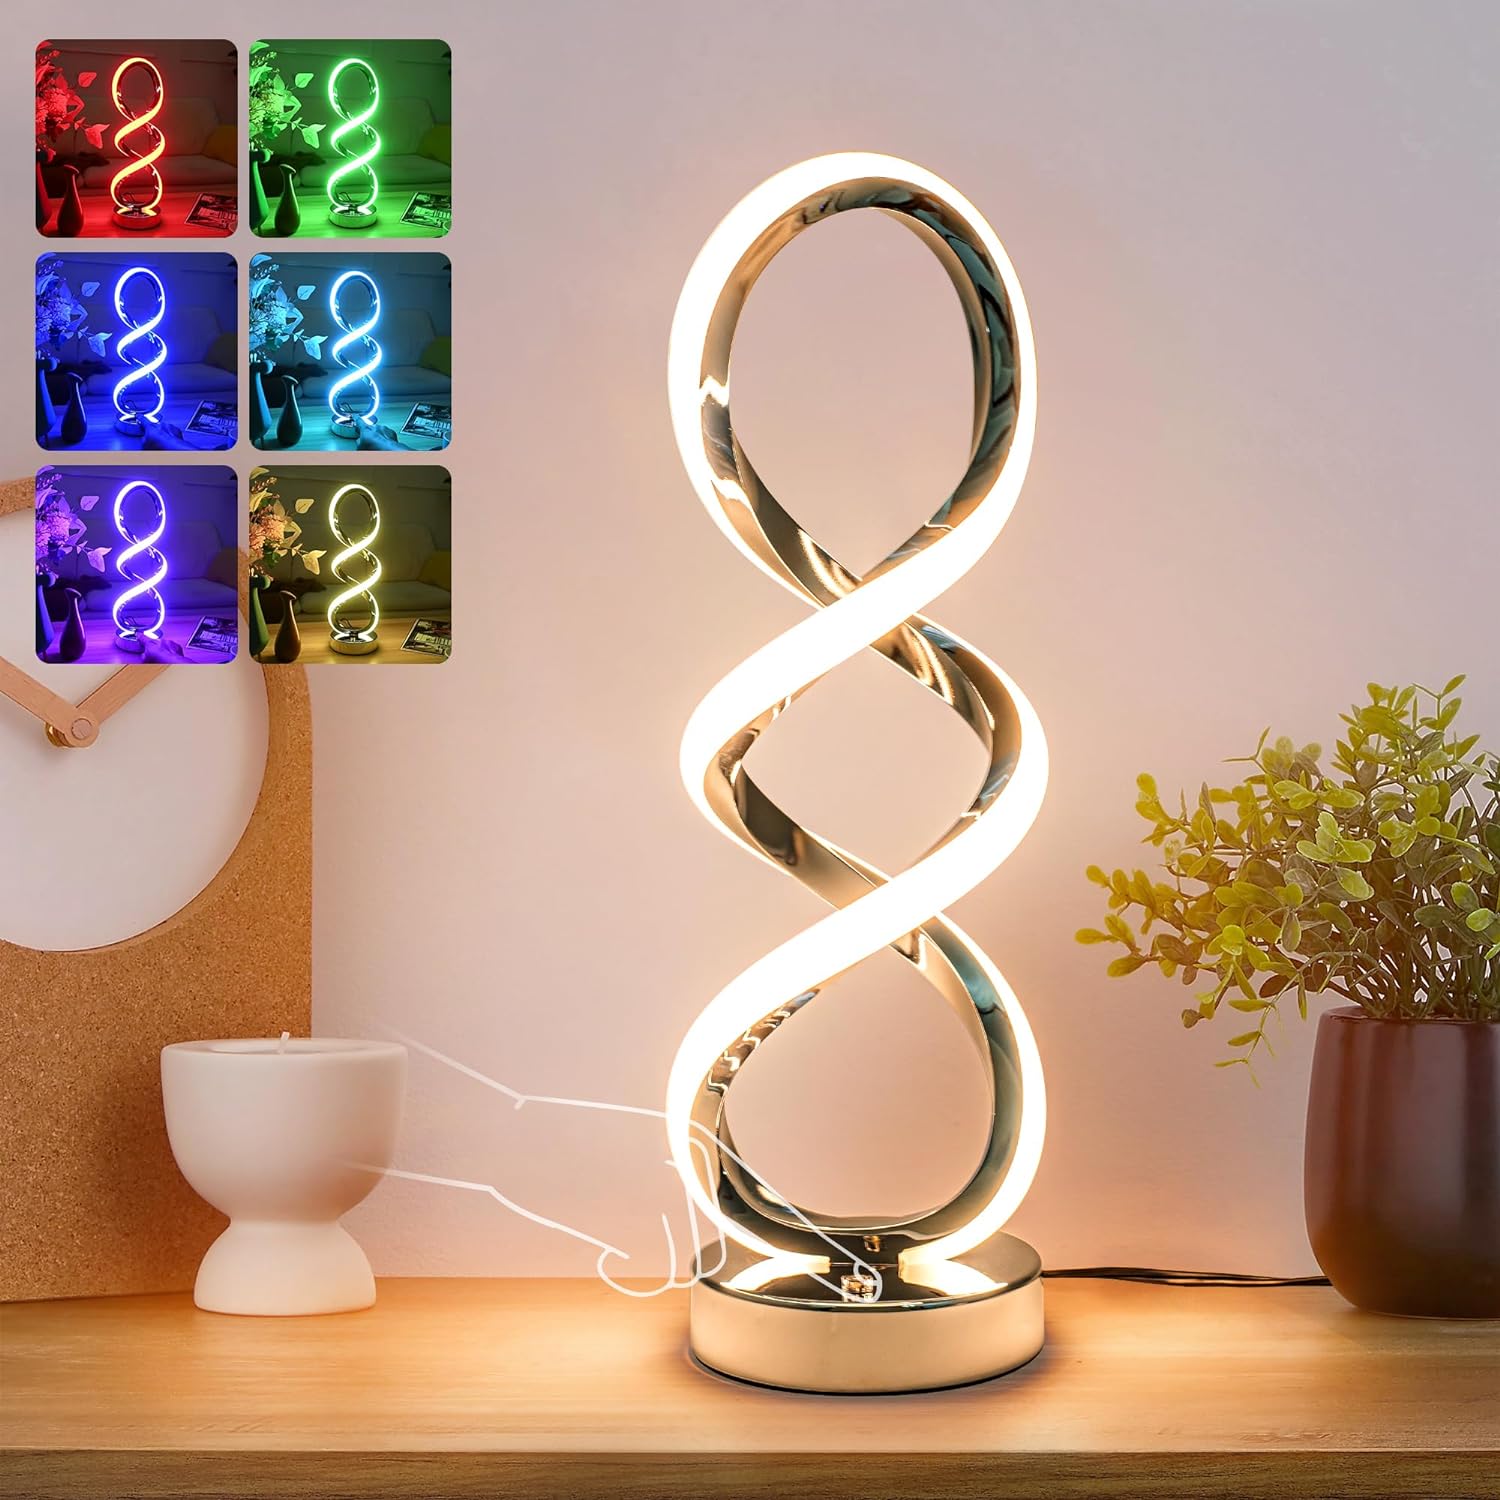 Adebime Modern Spiral RGB Table Lamp, Touch Dimmable Bedside Lamp, 7 Colors 10 Light Modes Spiral Design Table Lamp, Unique Nightstand Lamp for Living Room, Bedroom, Cool Lamps for Ideal Gift